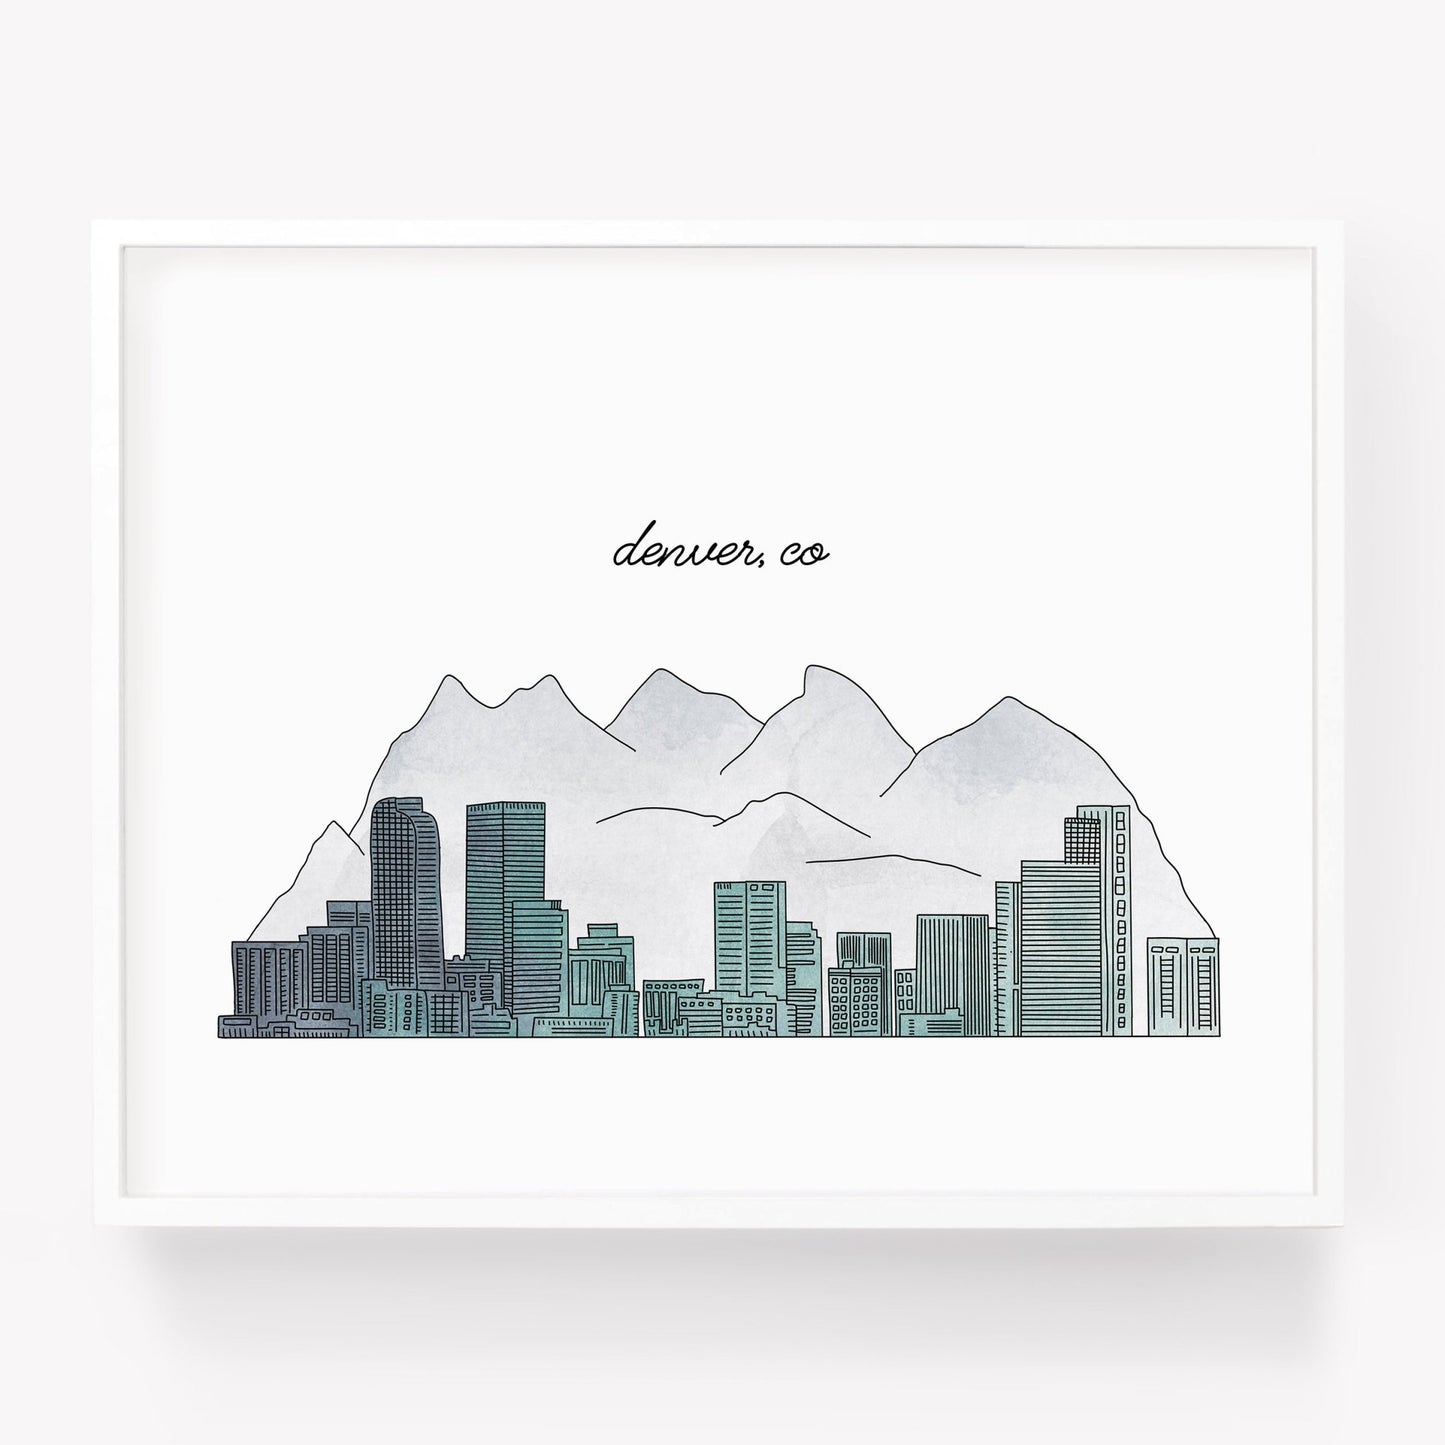 A city art print of a skyline drawing of Denver Colorad - Sparks House Co